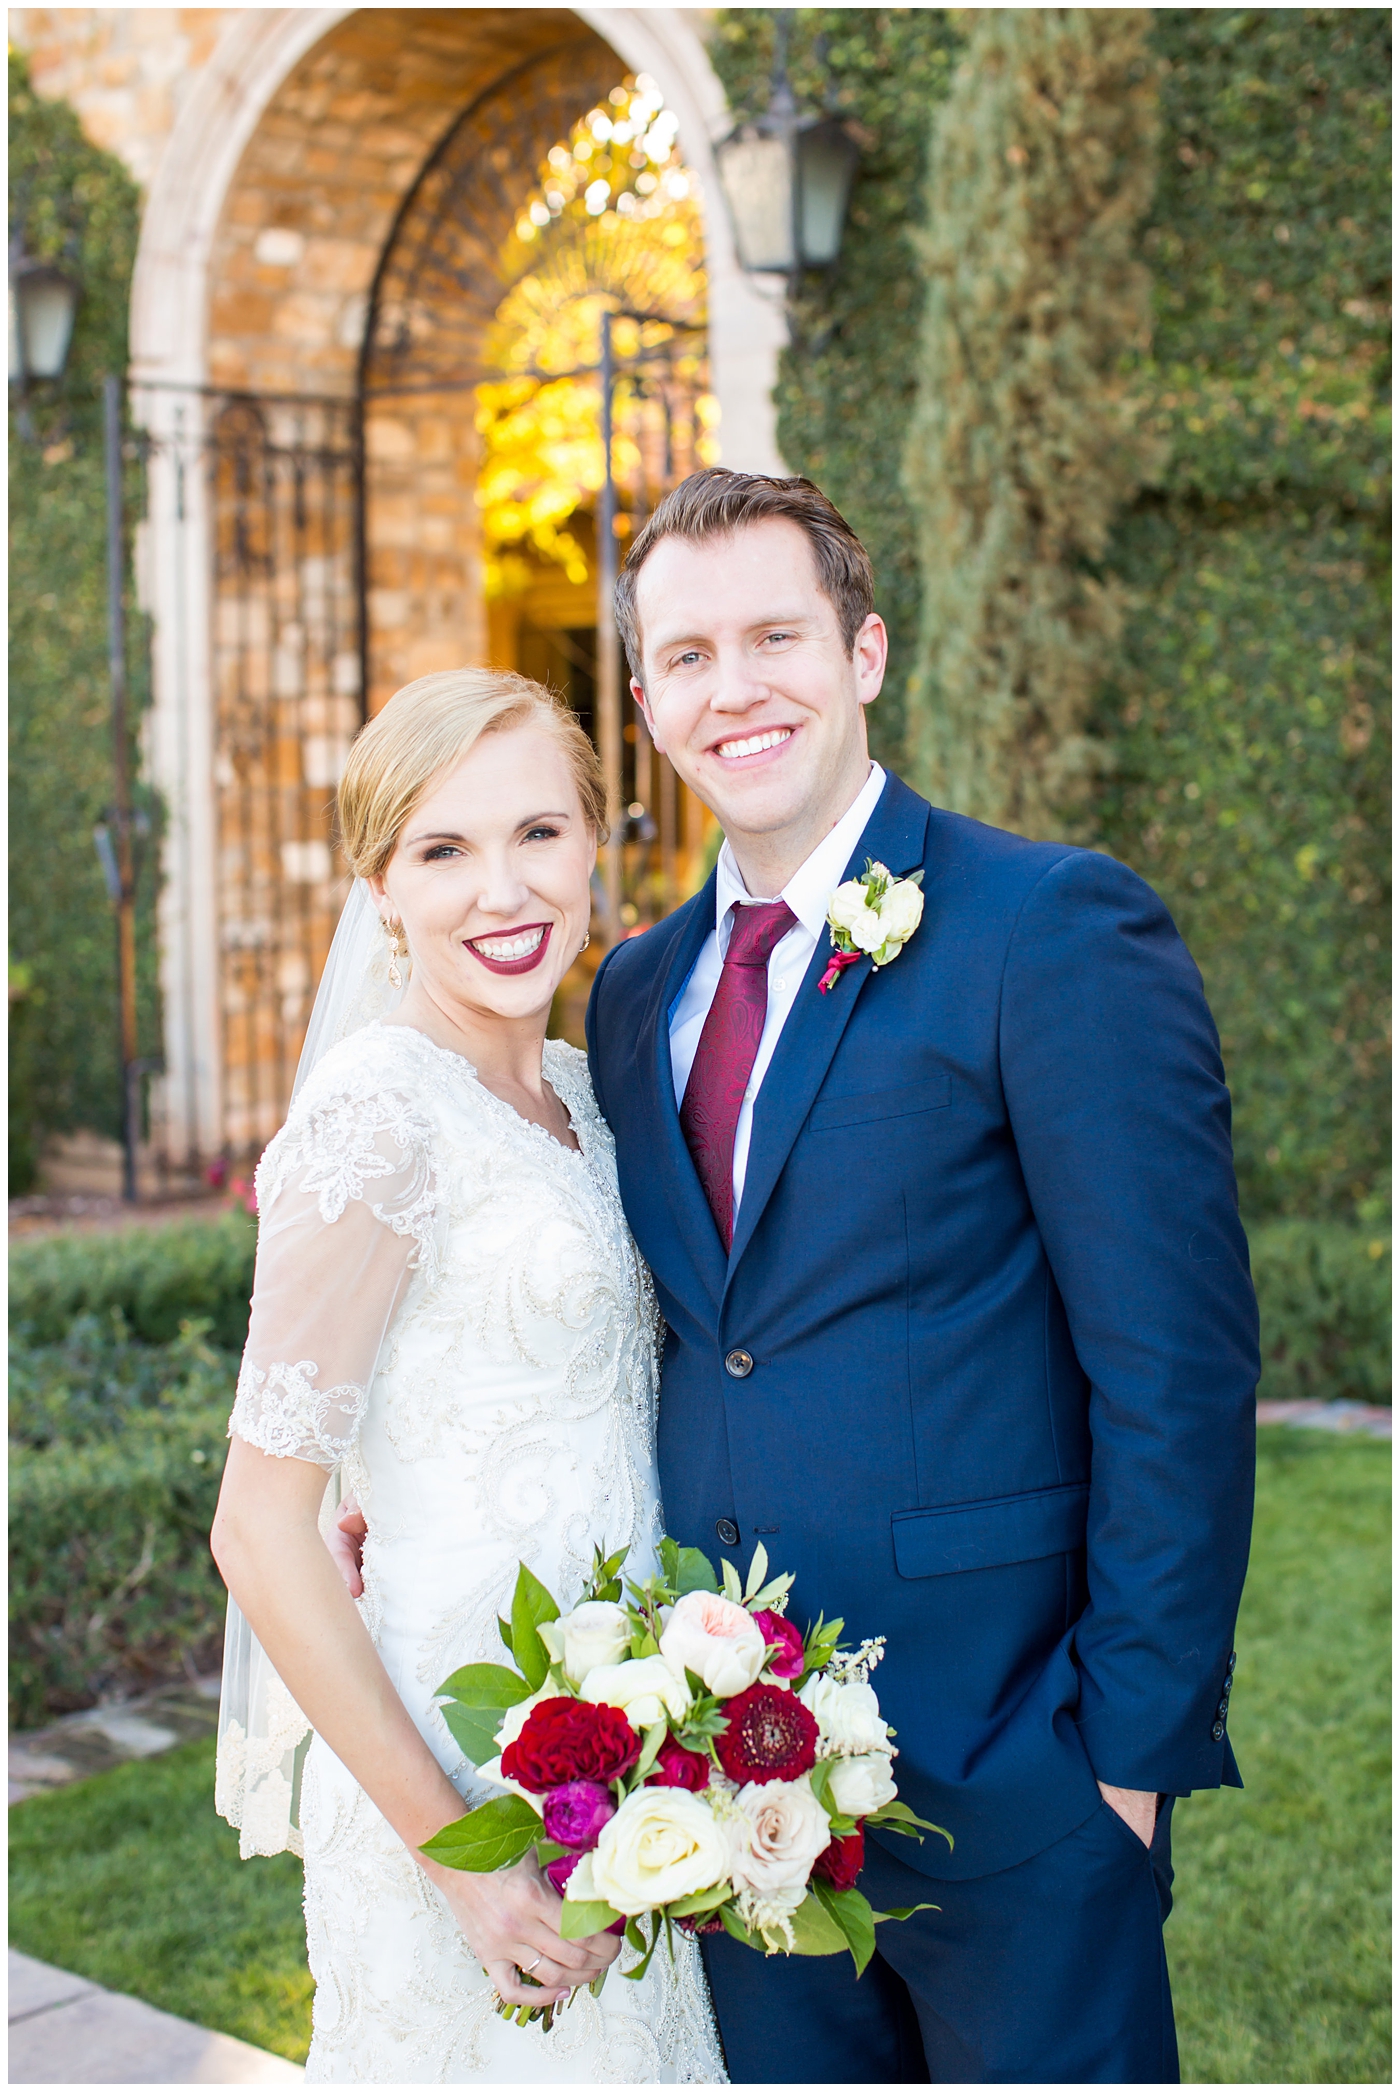 bride in sleeved lace dress with burgundy, white, and green wedding bouquet and groom in navy suit with burgundy tie wedding day portrait at Villa Siena